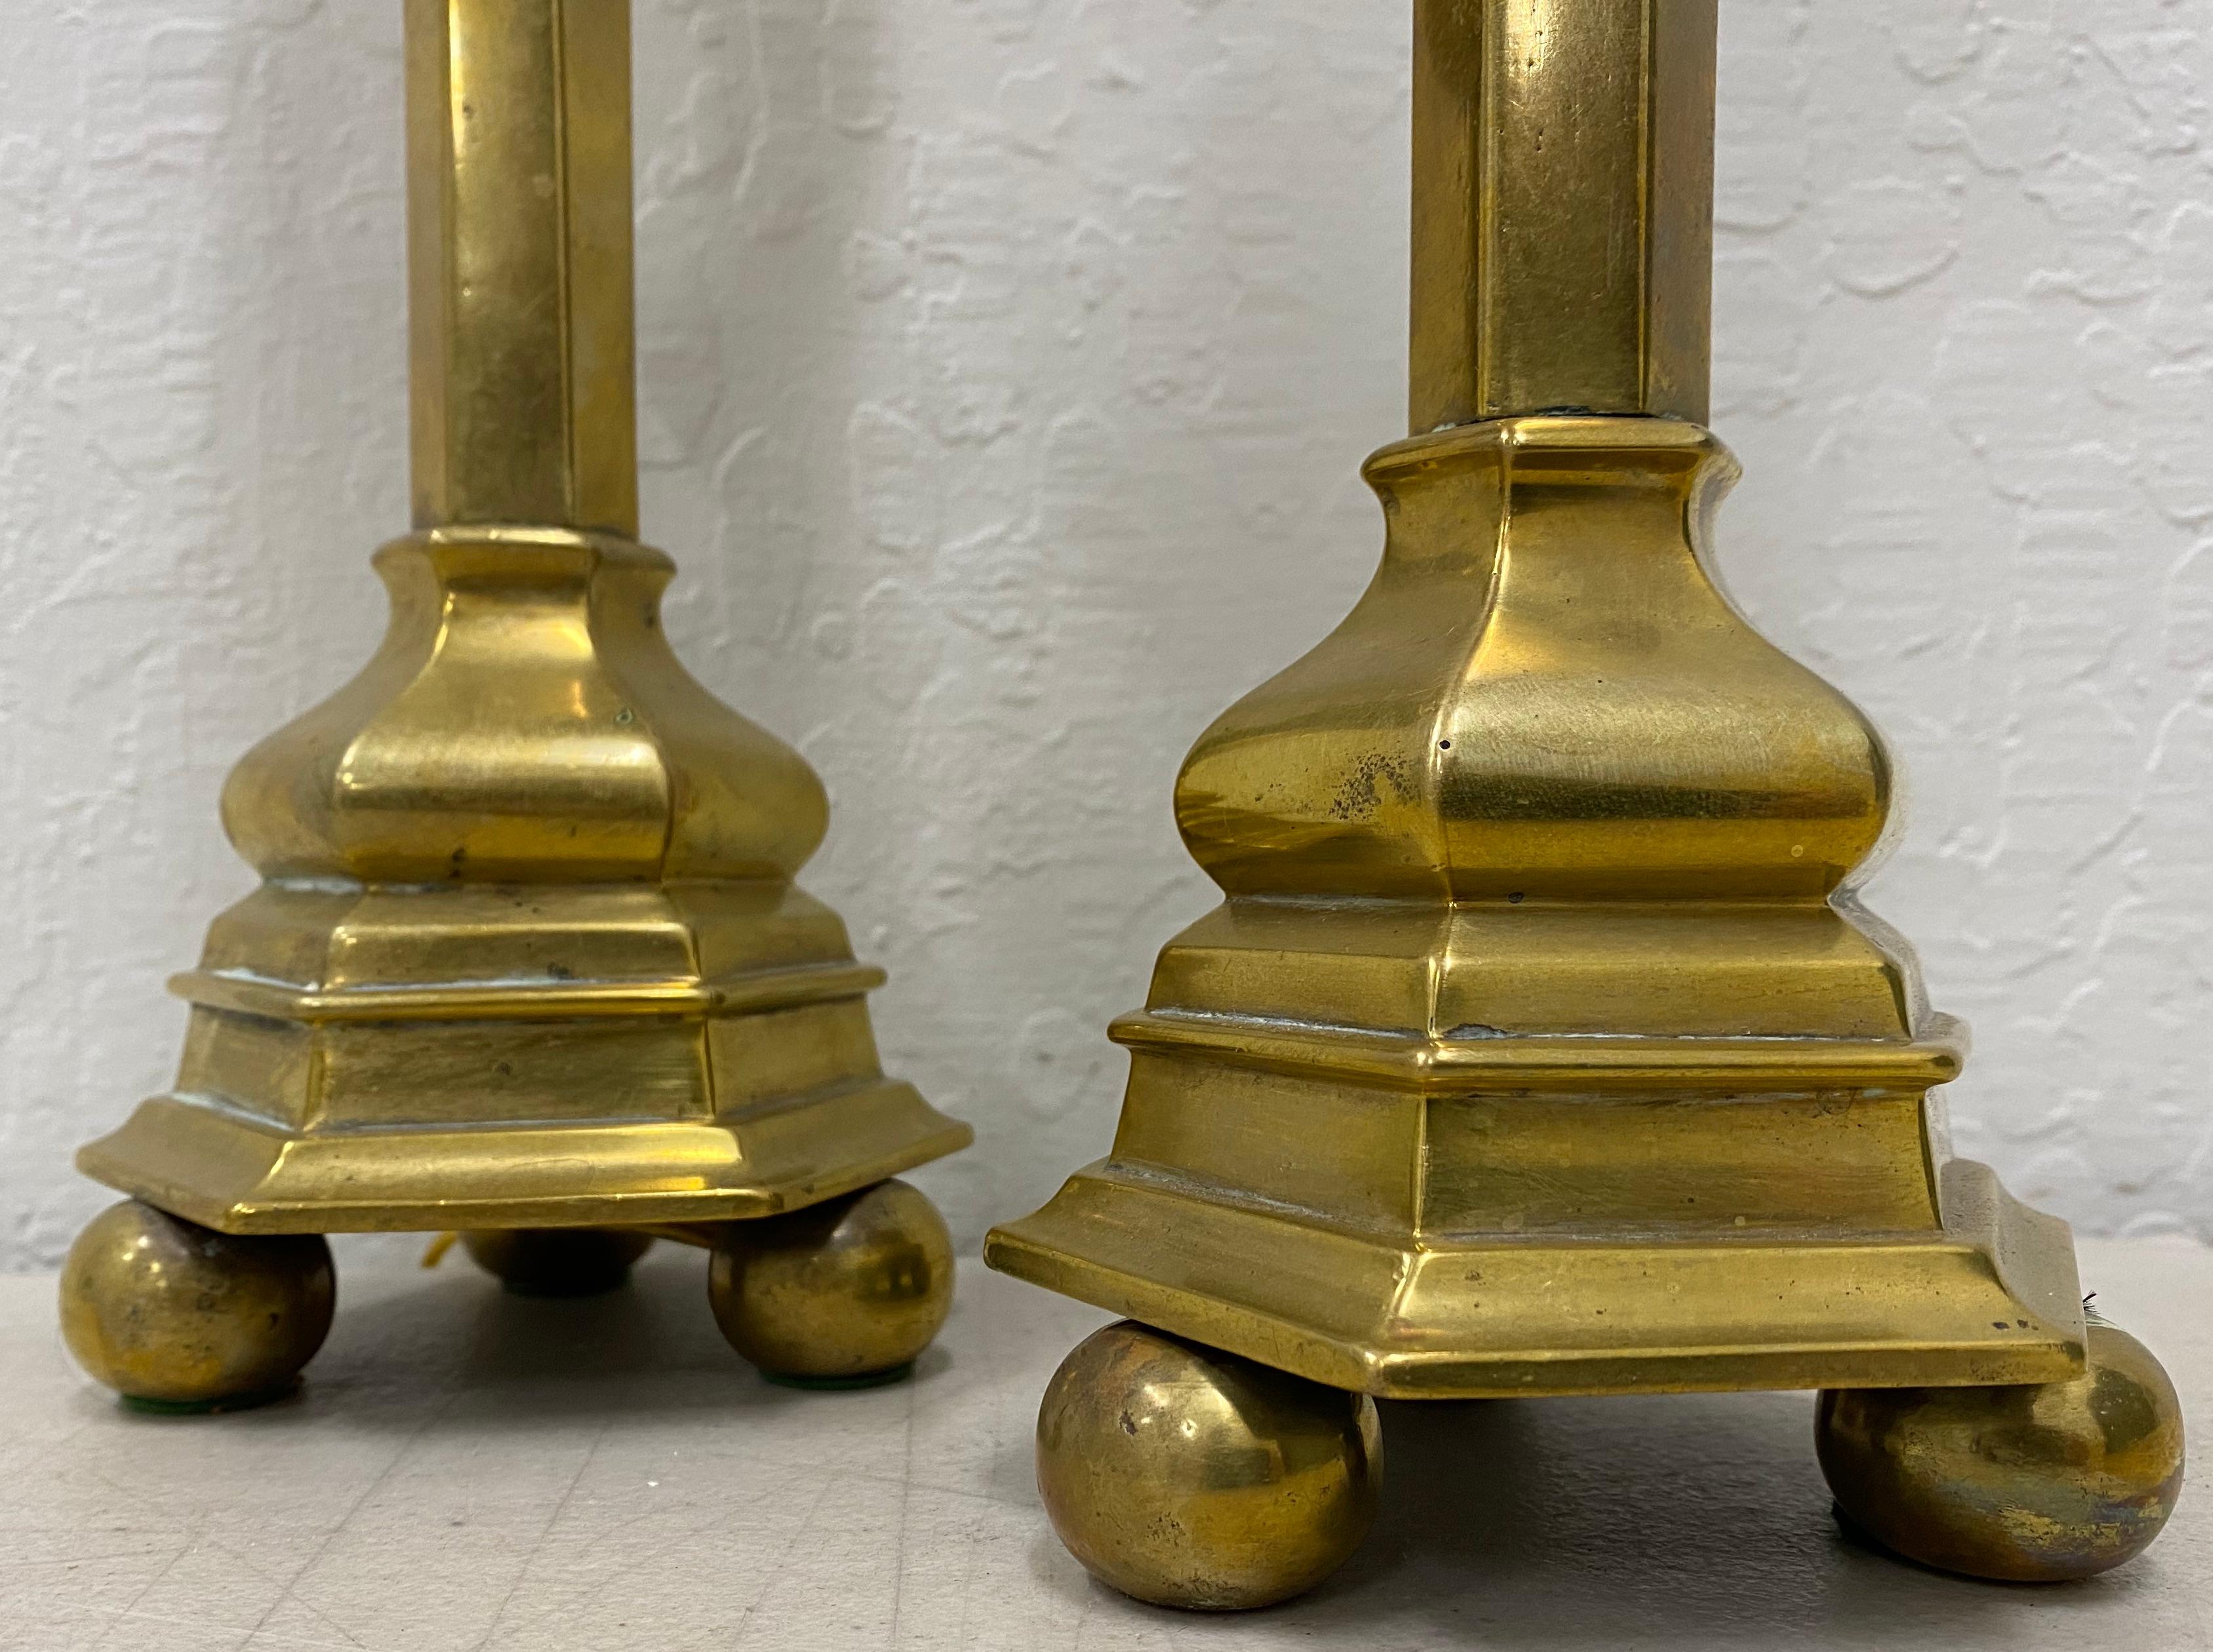 English Mid-19th Century Brass Oil Lamps Converted to Table Lamps For Sale